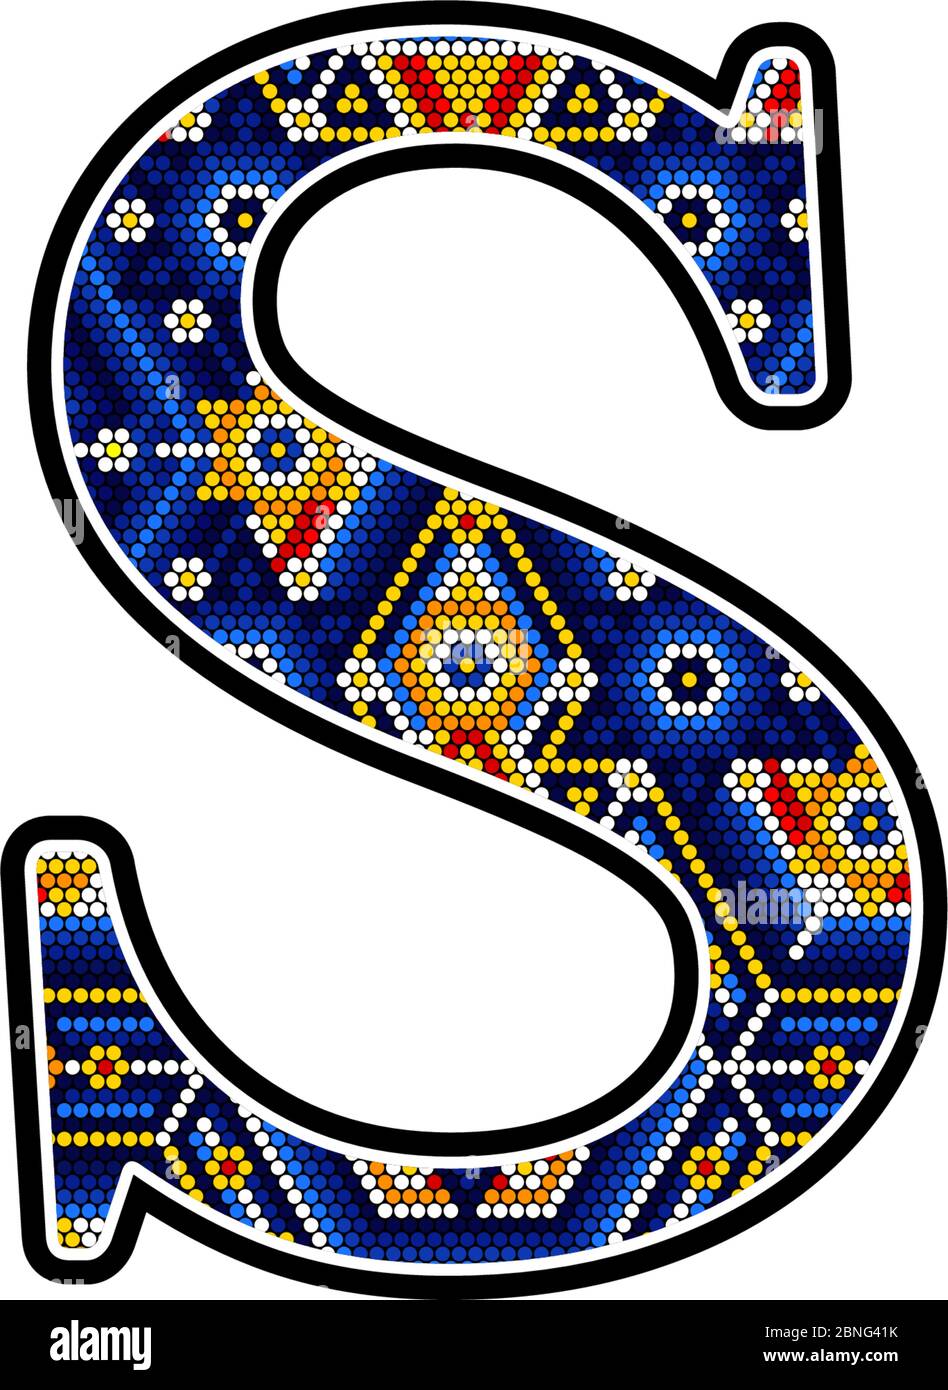 initial capital letter S with colorful dots. Abstract design inspired in mexican huichol craft art style. Isolated on white background Stock Vector